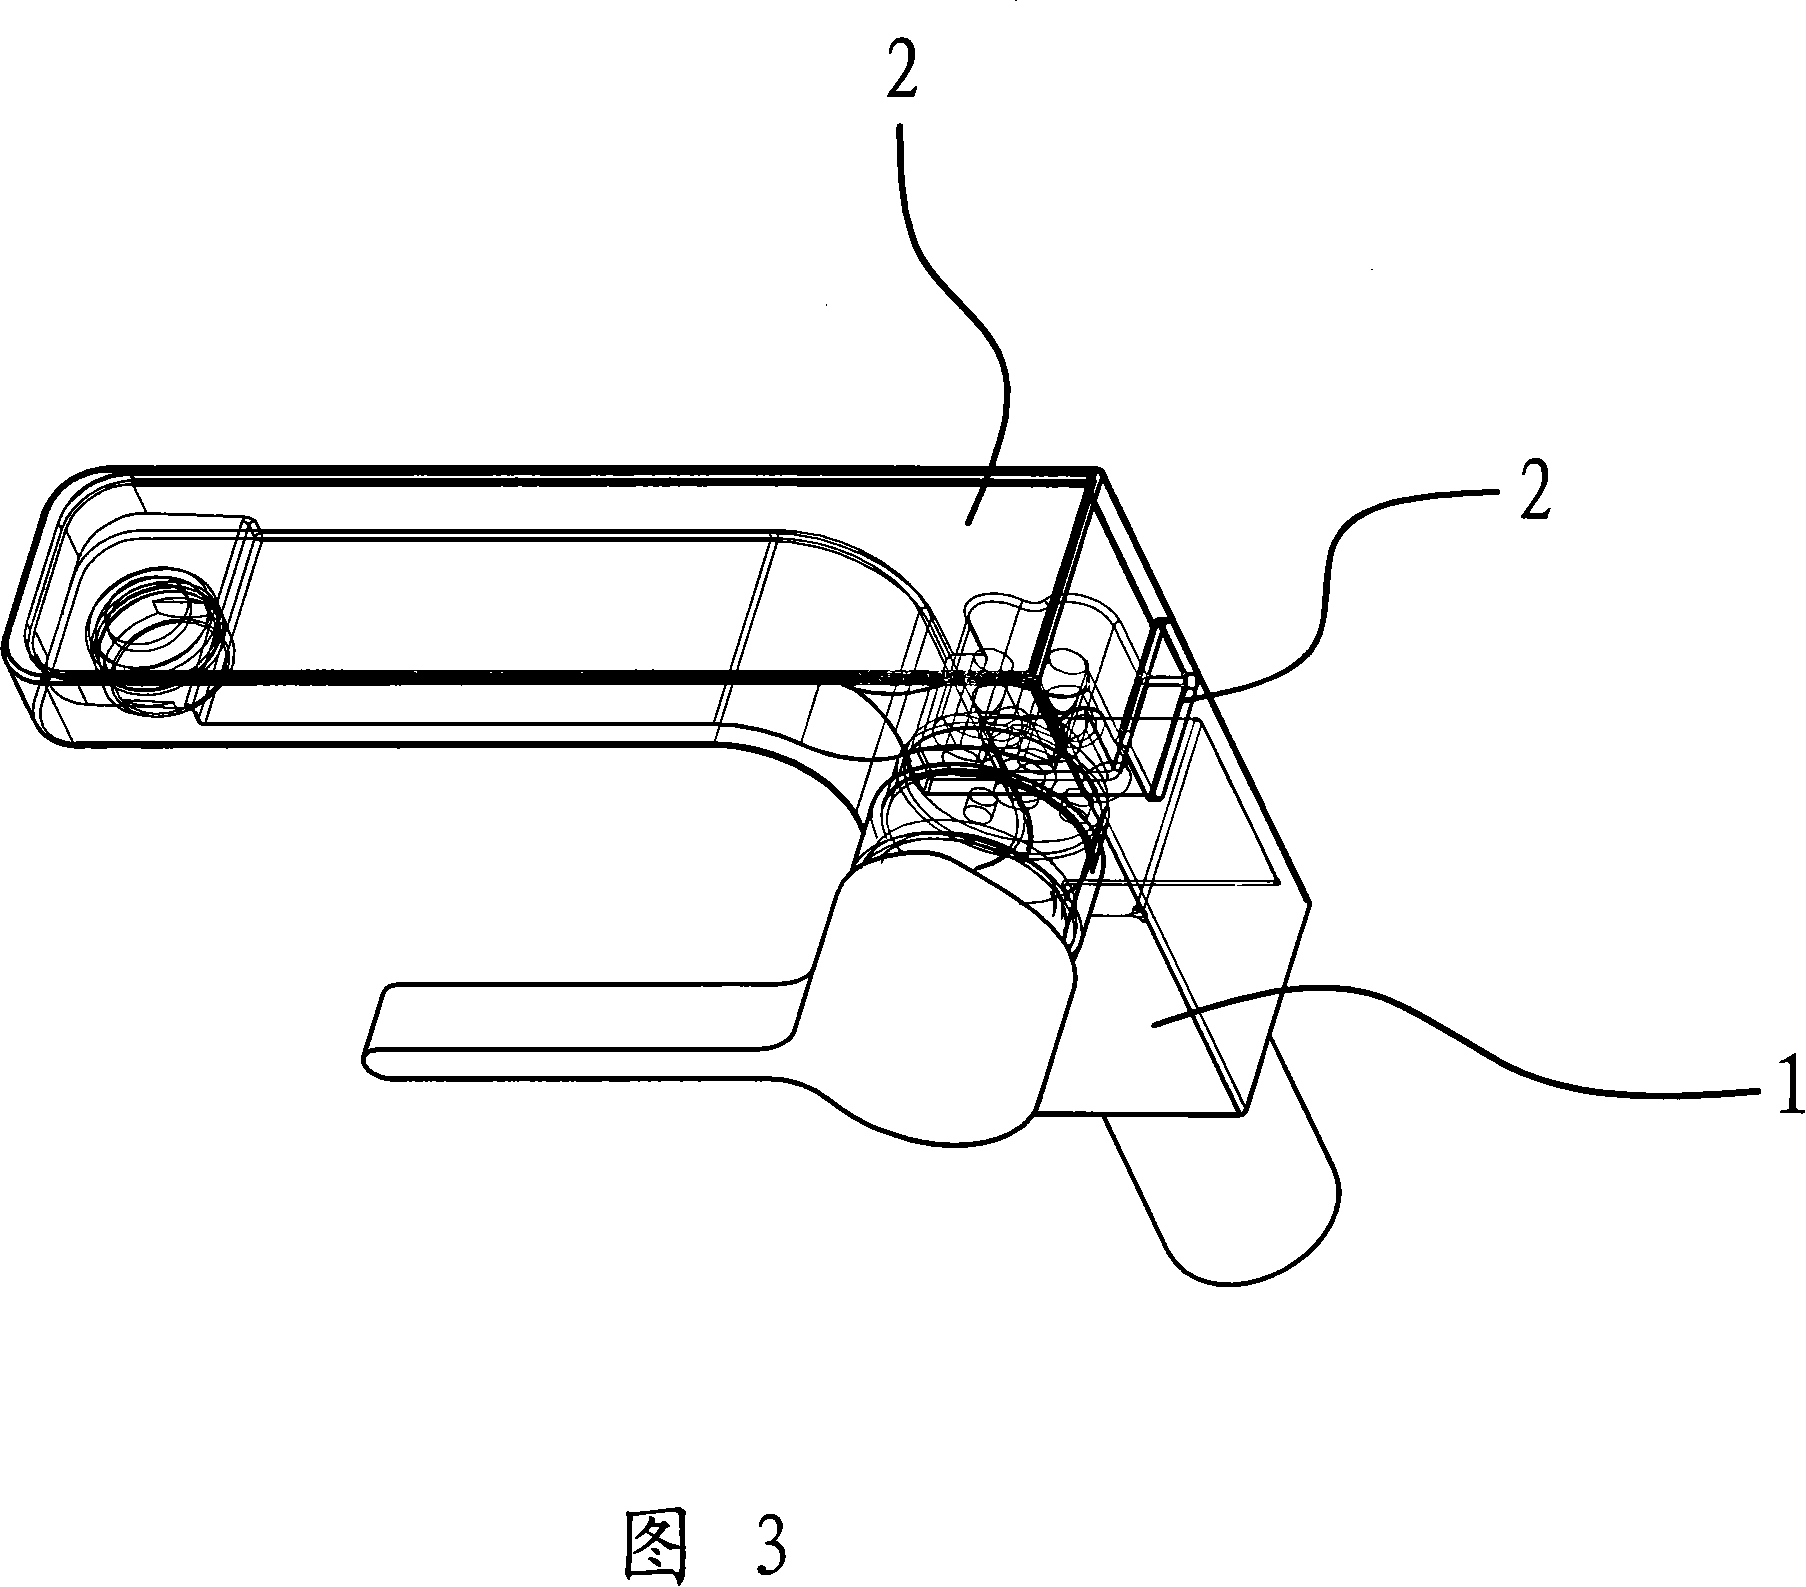 Method for manufacturing stainless steel water tap